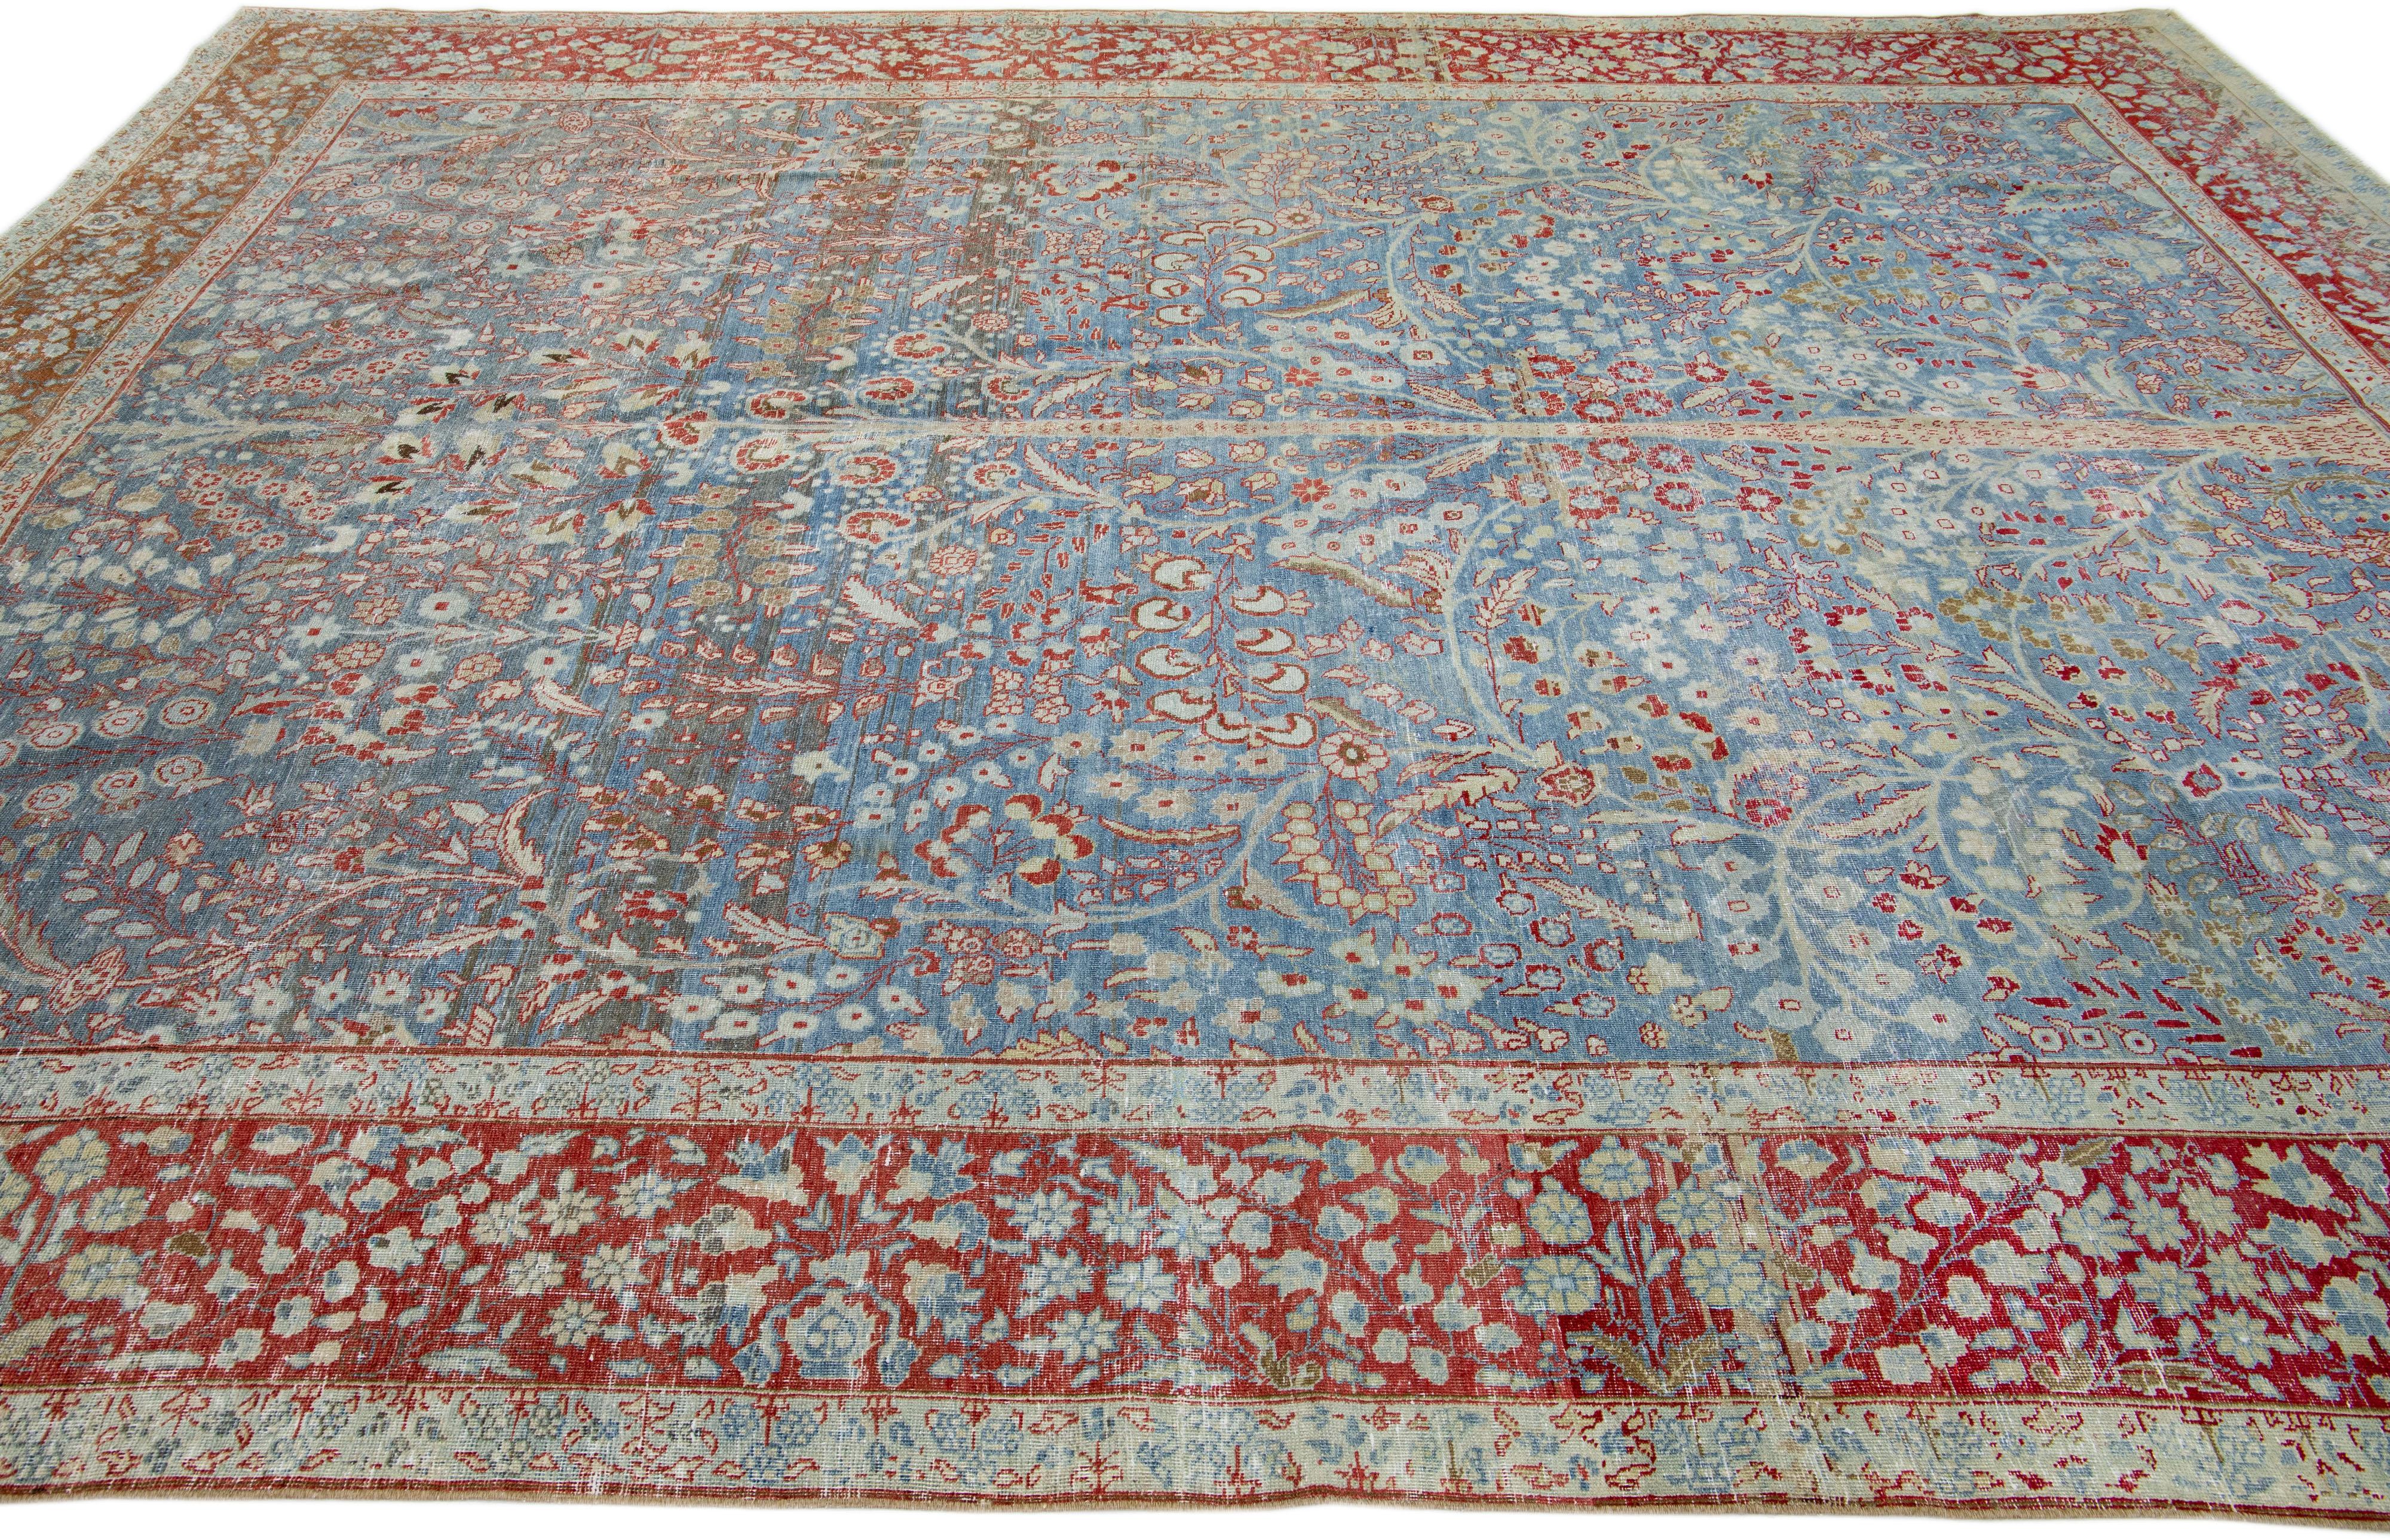 20th Century Antique Persian Tabriz Handmade Blue Wool Rug with Shah Abbasi Design For Sale